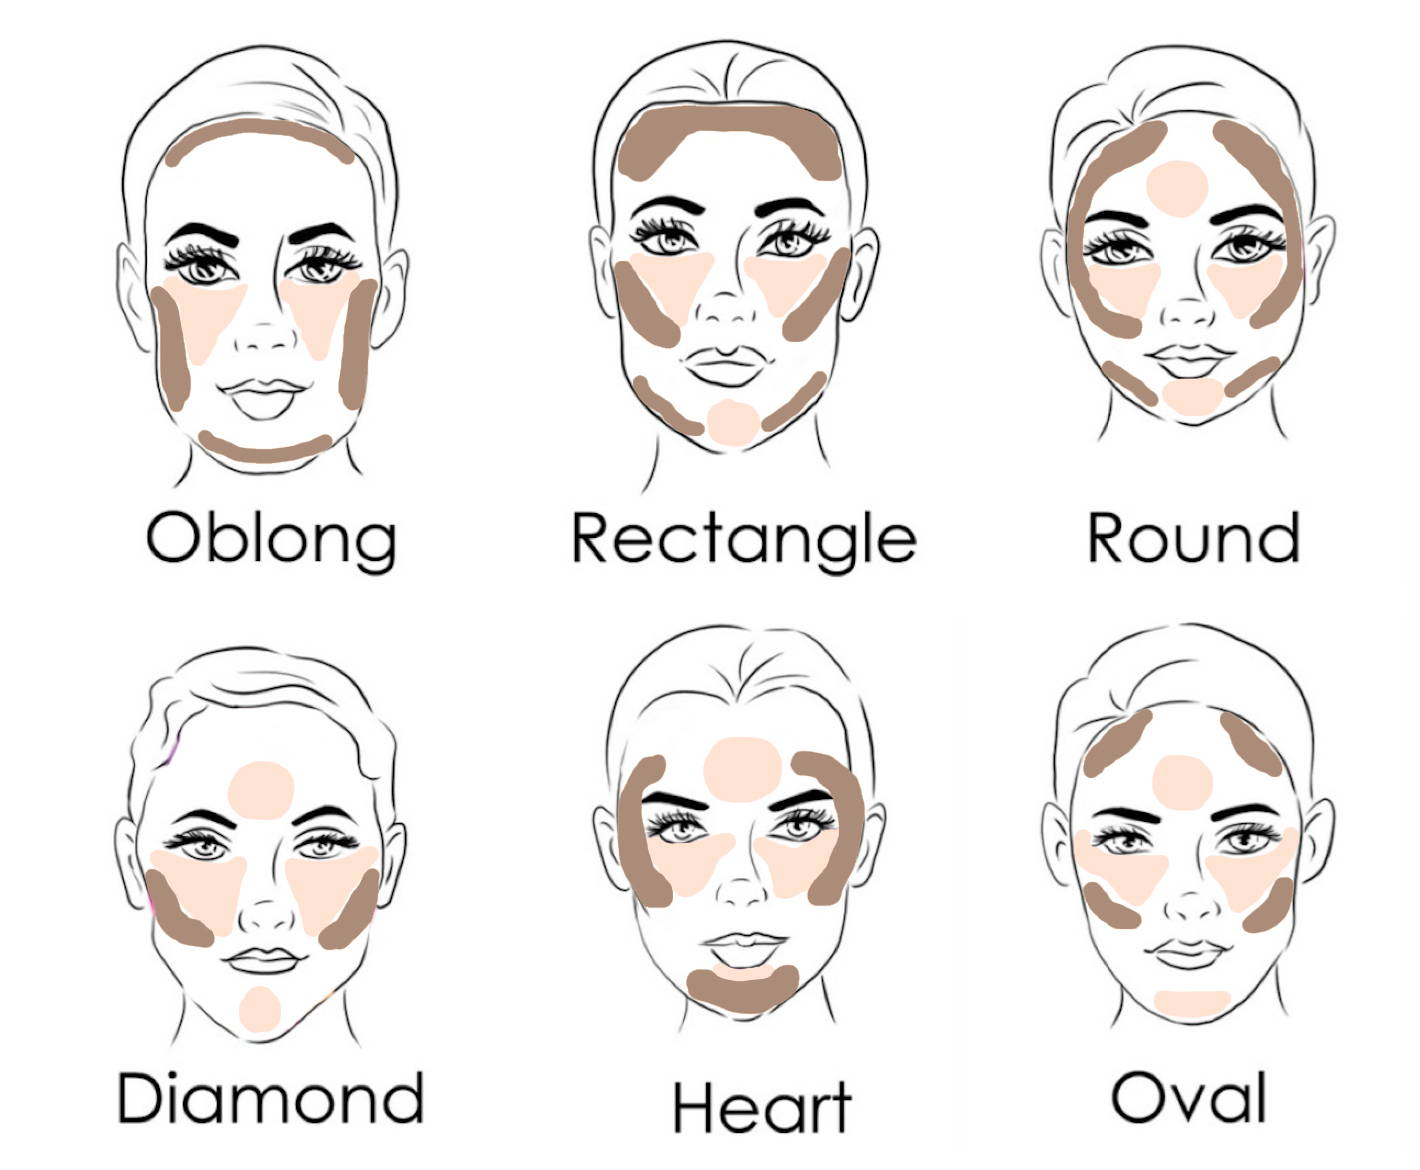 Contouring and highlighting can vary depending on your face shape